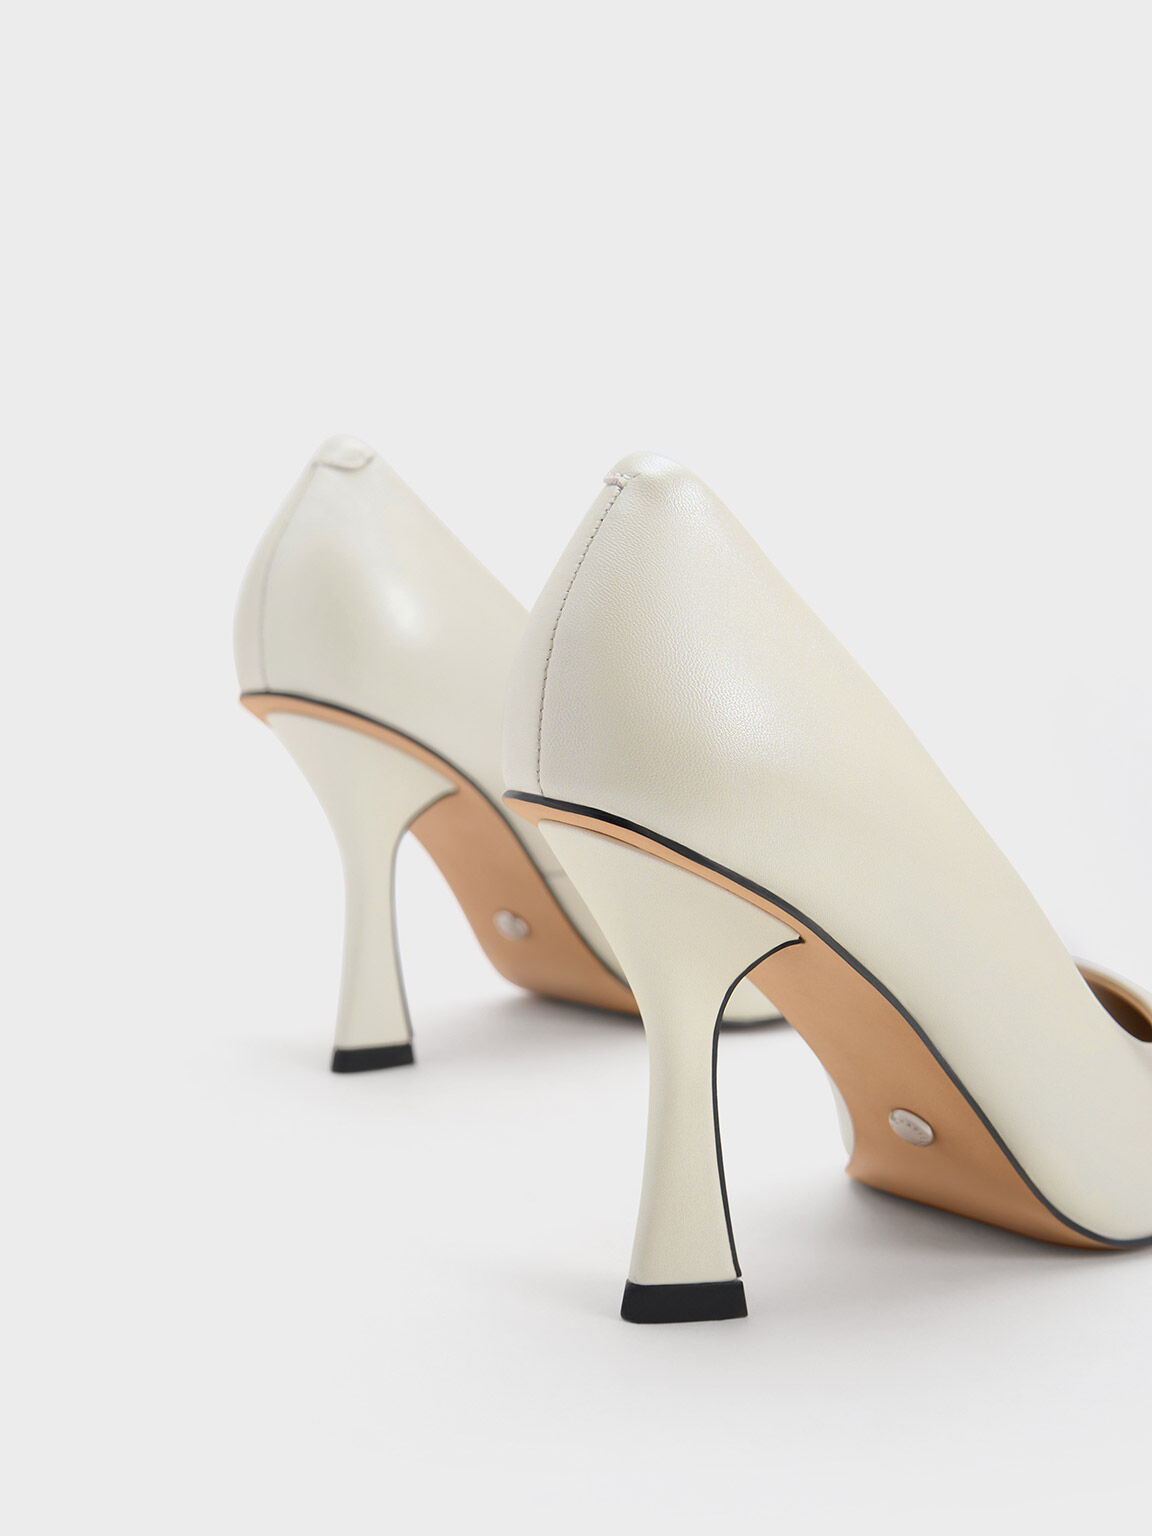 Leather Flare Heel Pumps, White, hi-res